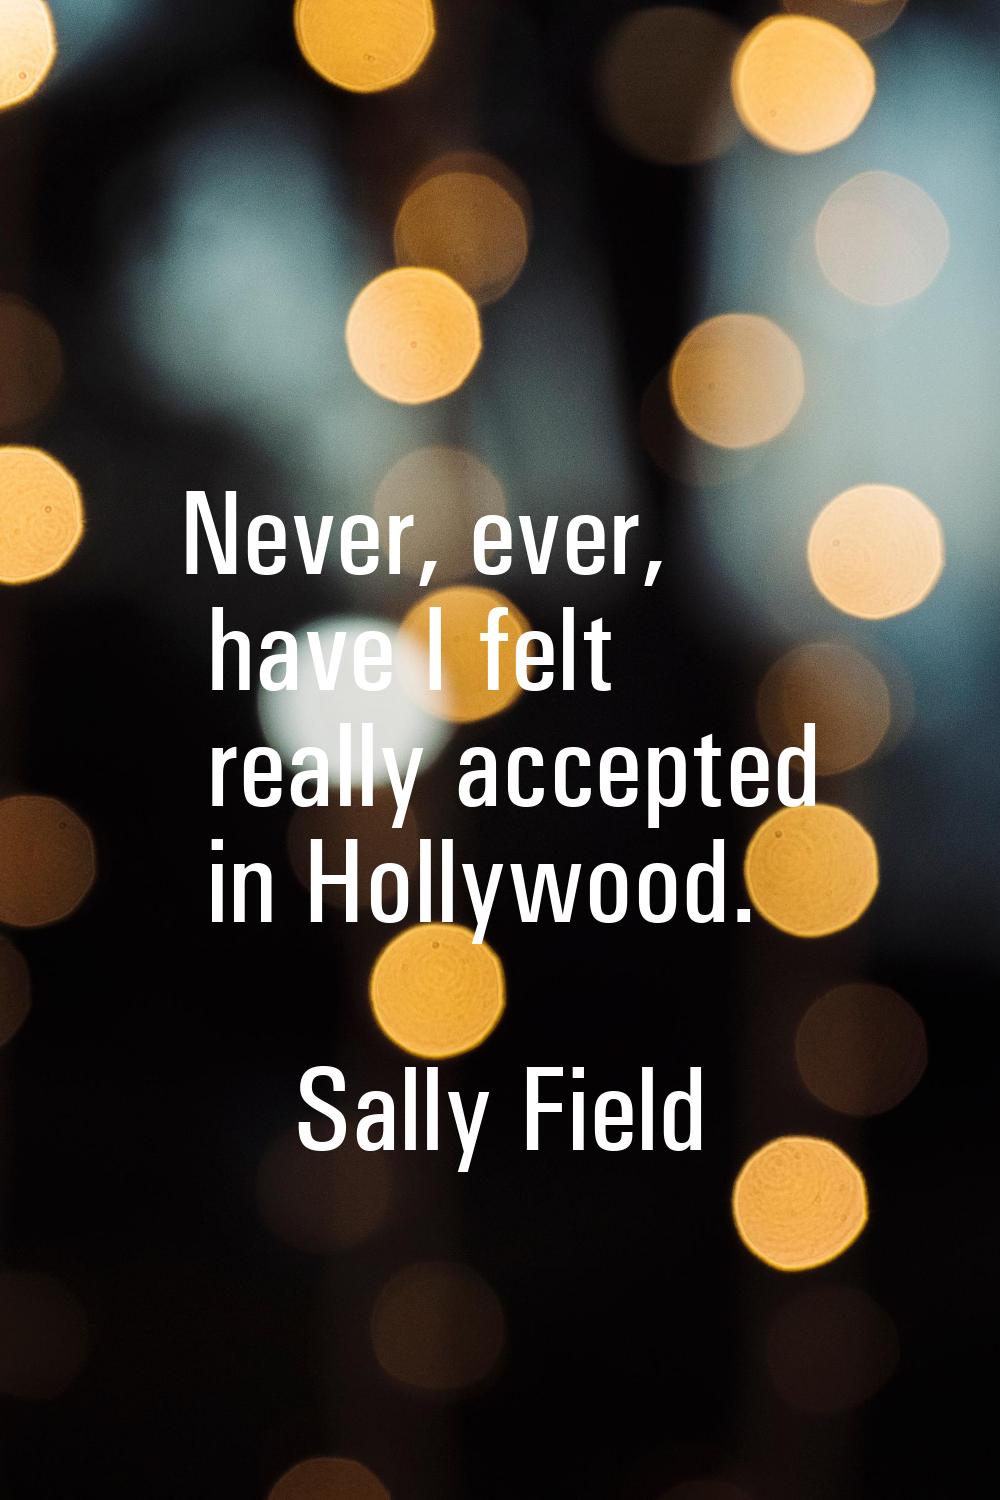 Never, ever, have I felt really accepted in Hollywood.